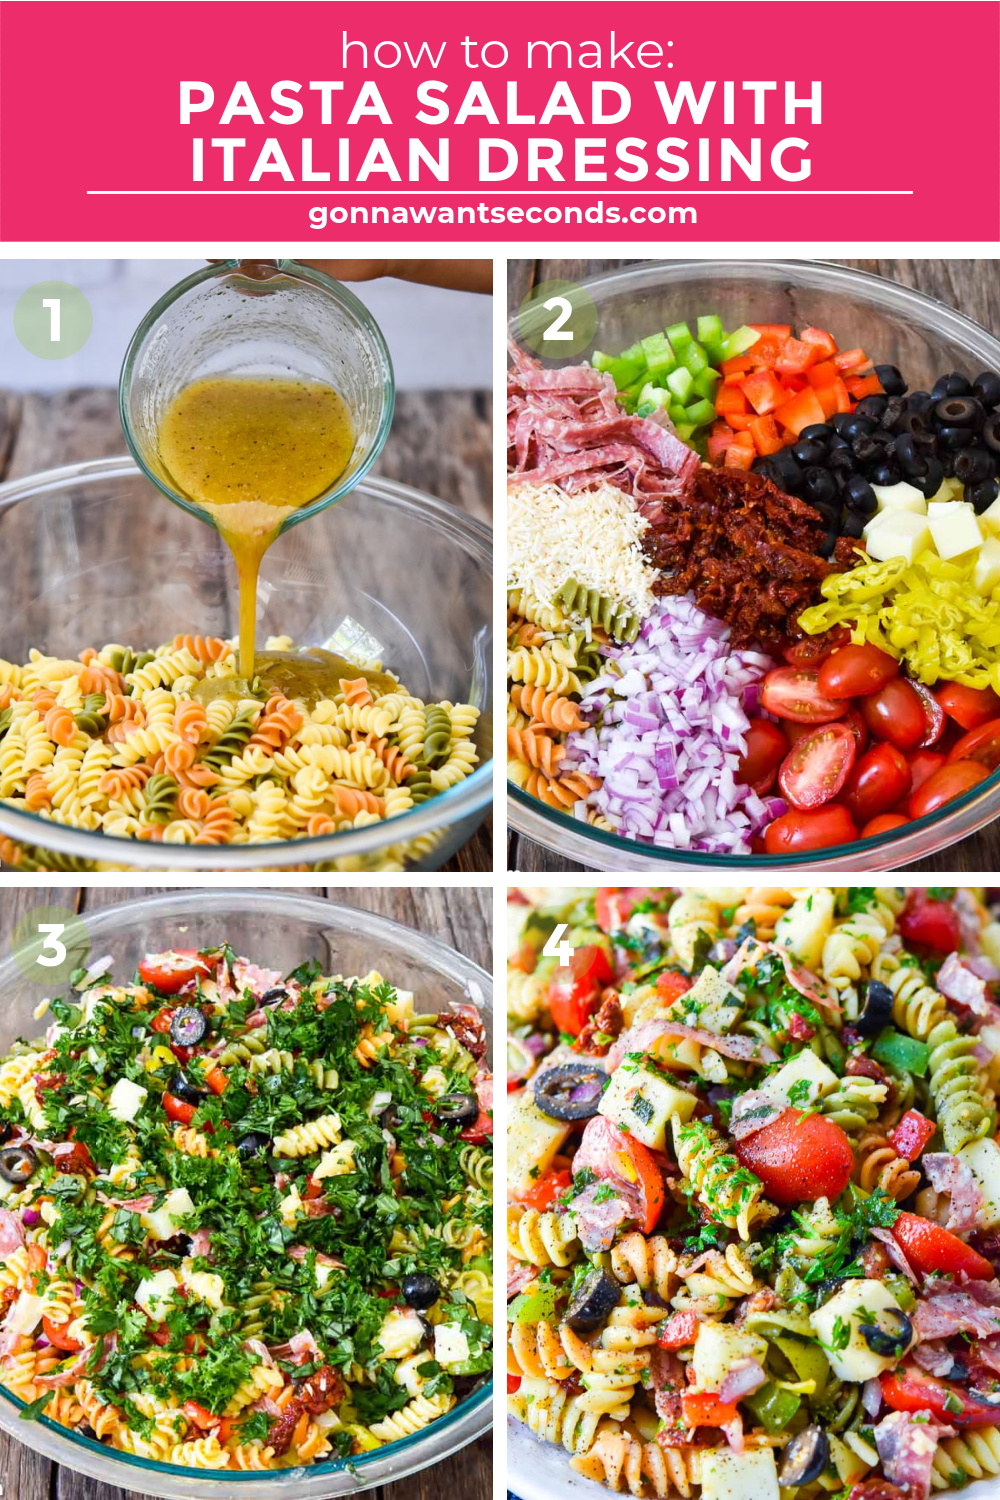 Step by step How to Make Pasta Salad With Italian Dressing